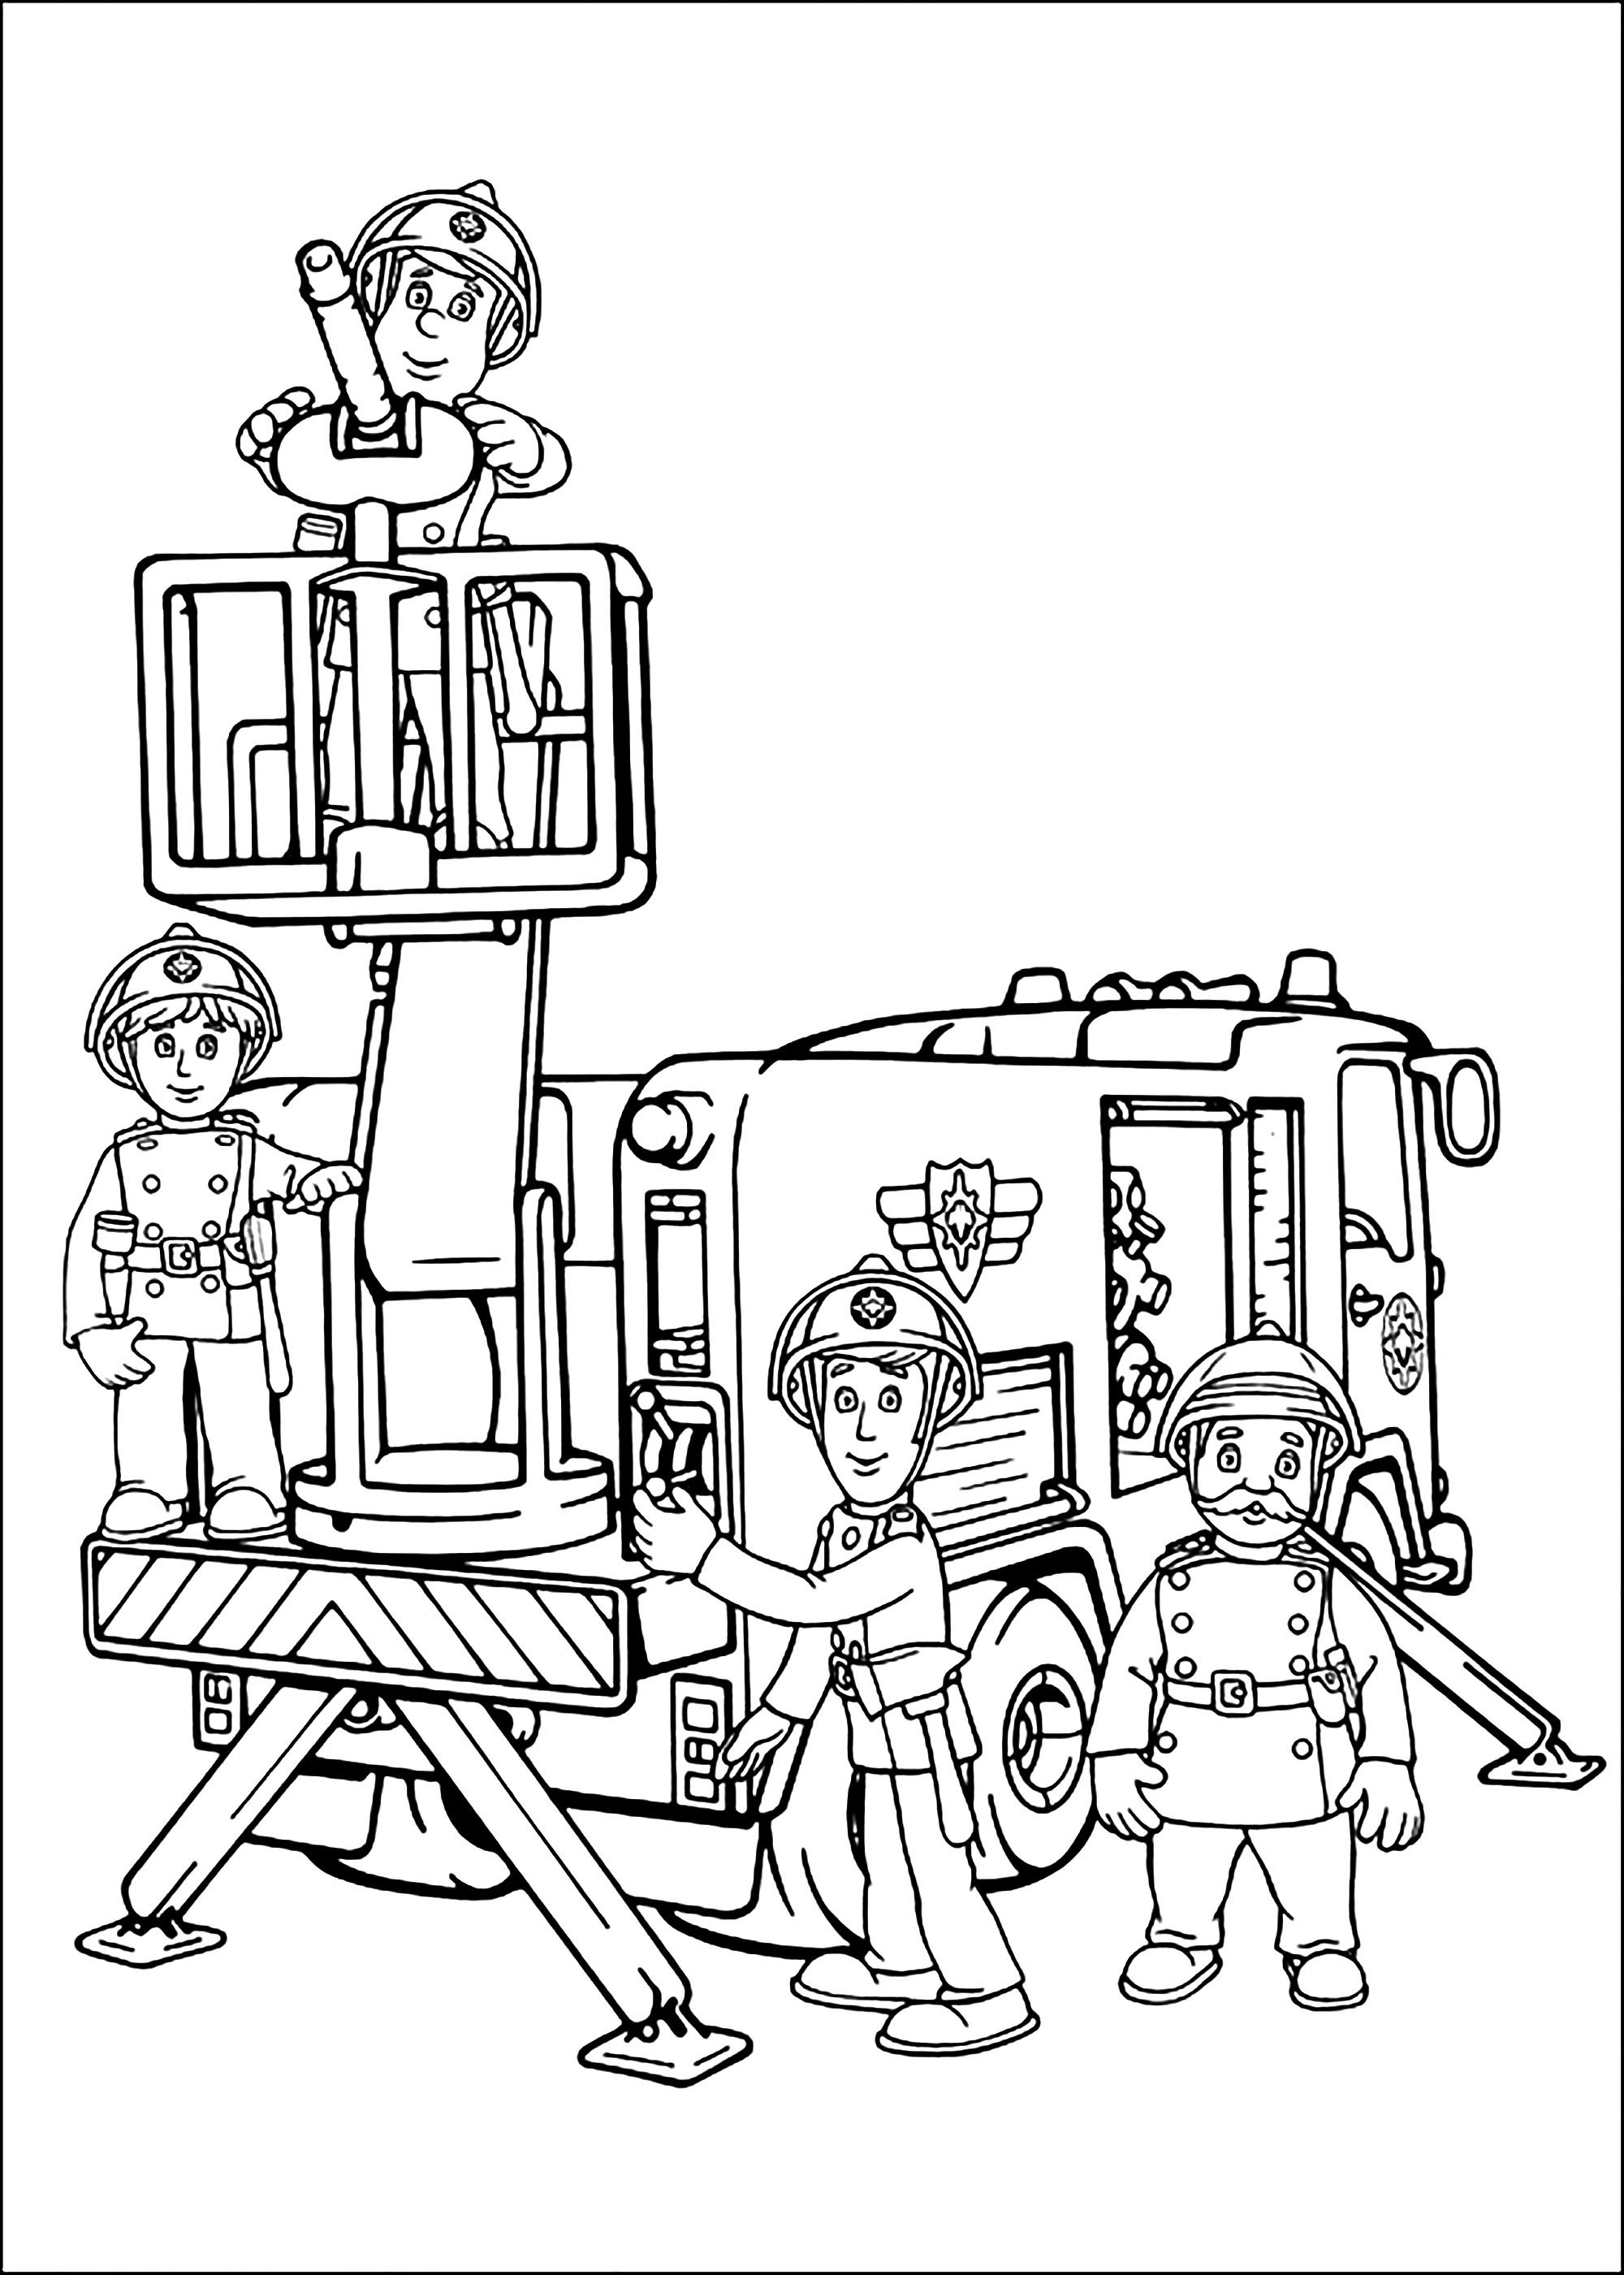 Free Fireman Coloring Pages Fire Department Kids Coloring Pages